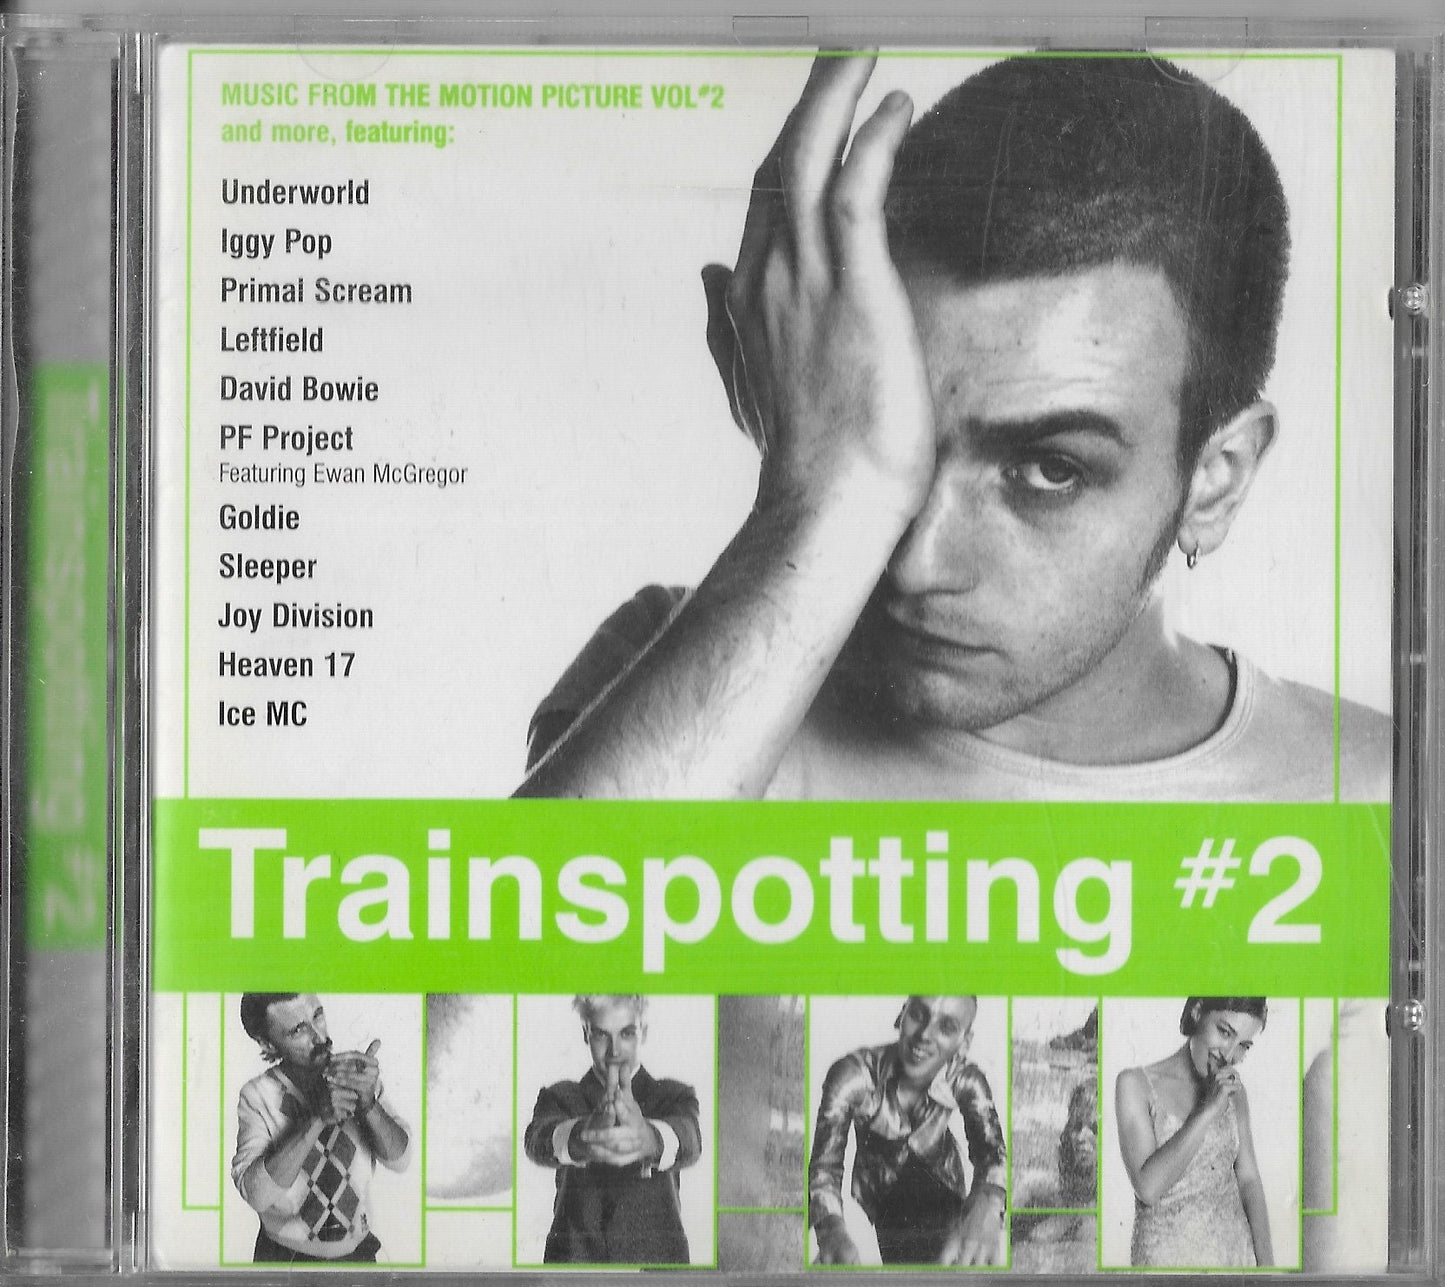 TRAINSPOTTING #2 - Music From The Motion Picture Vol #2